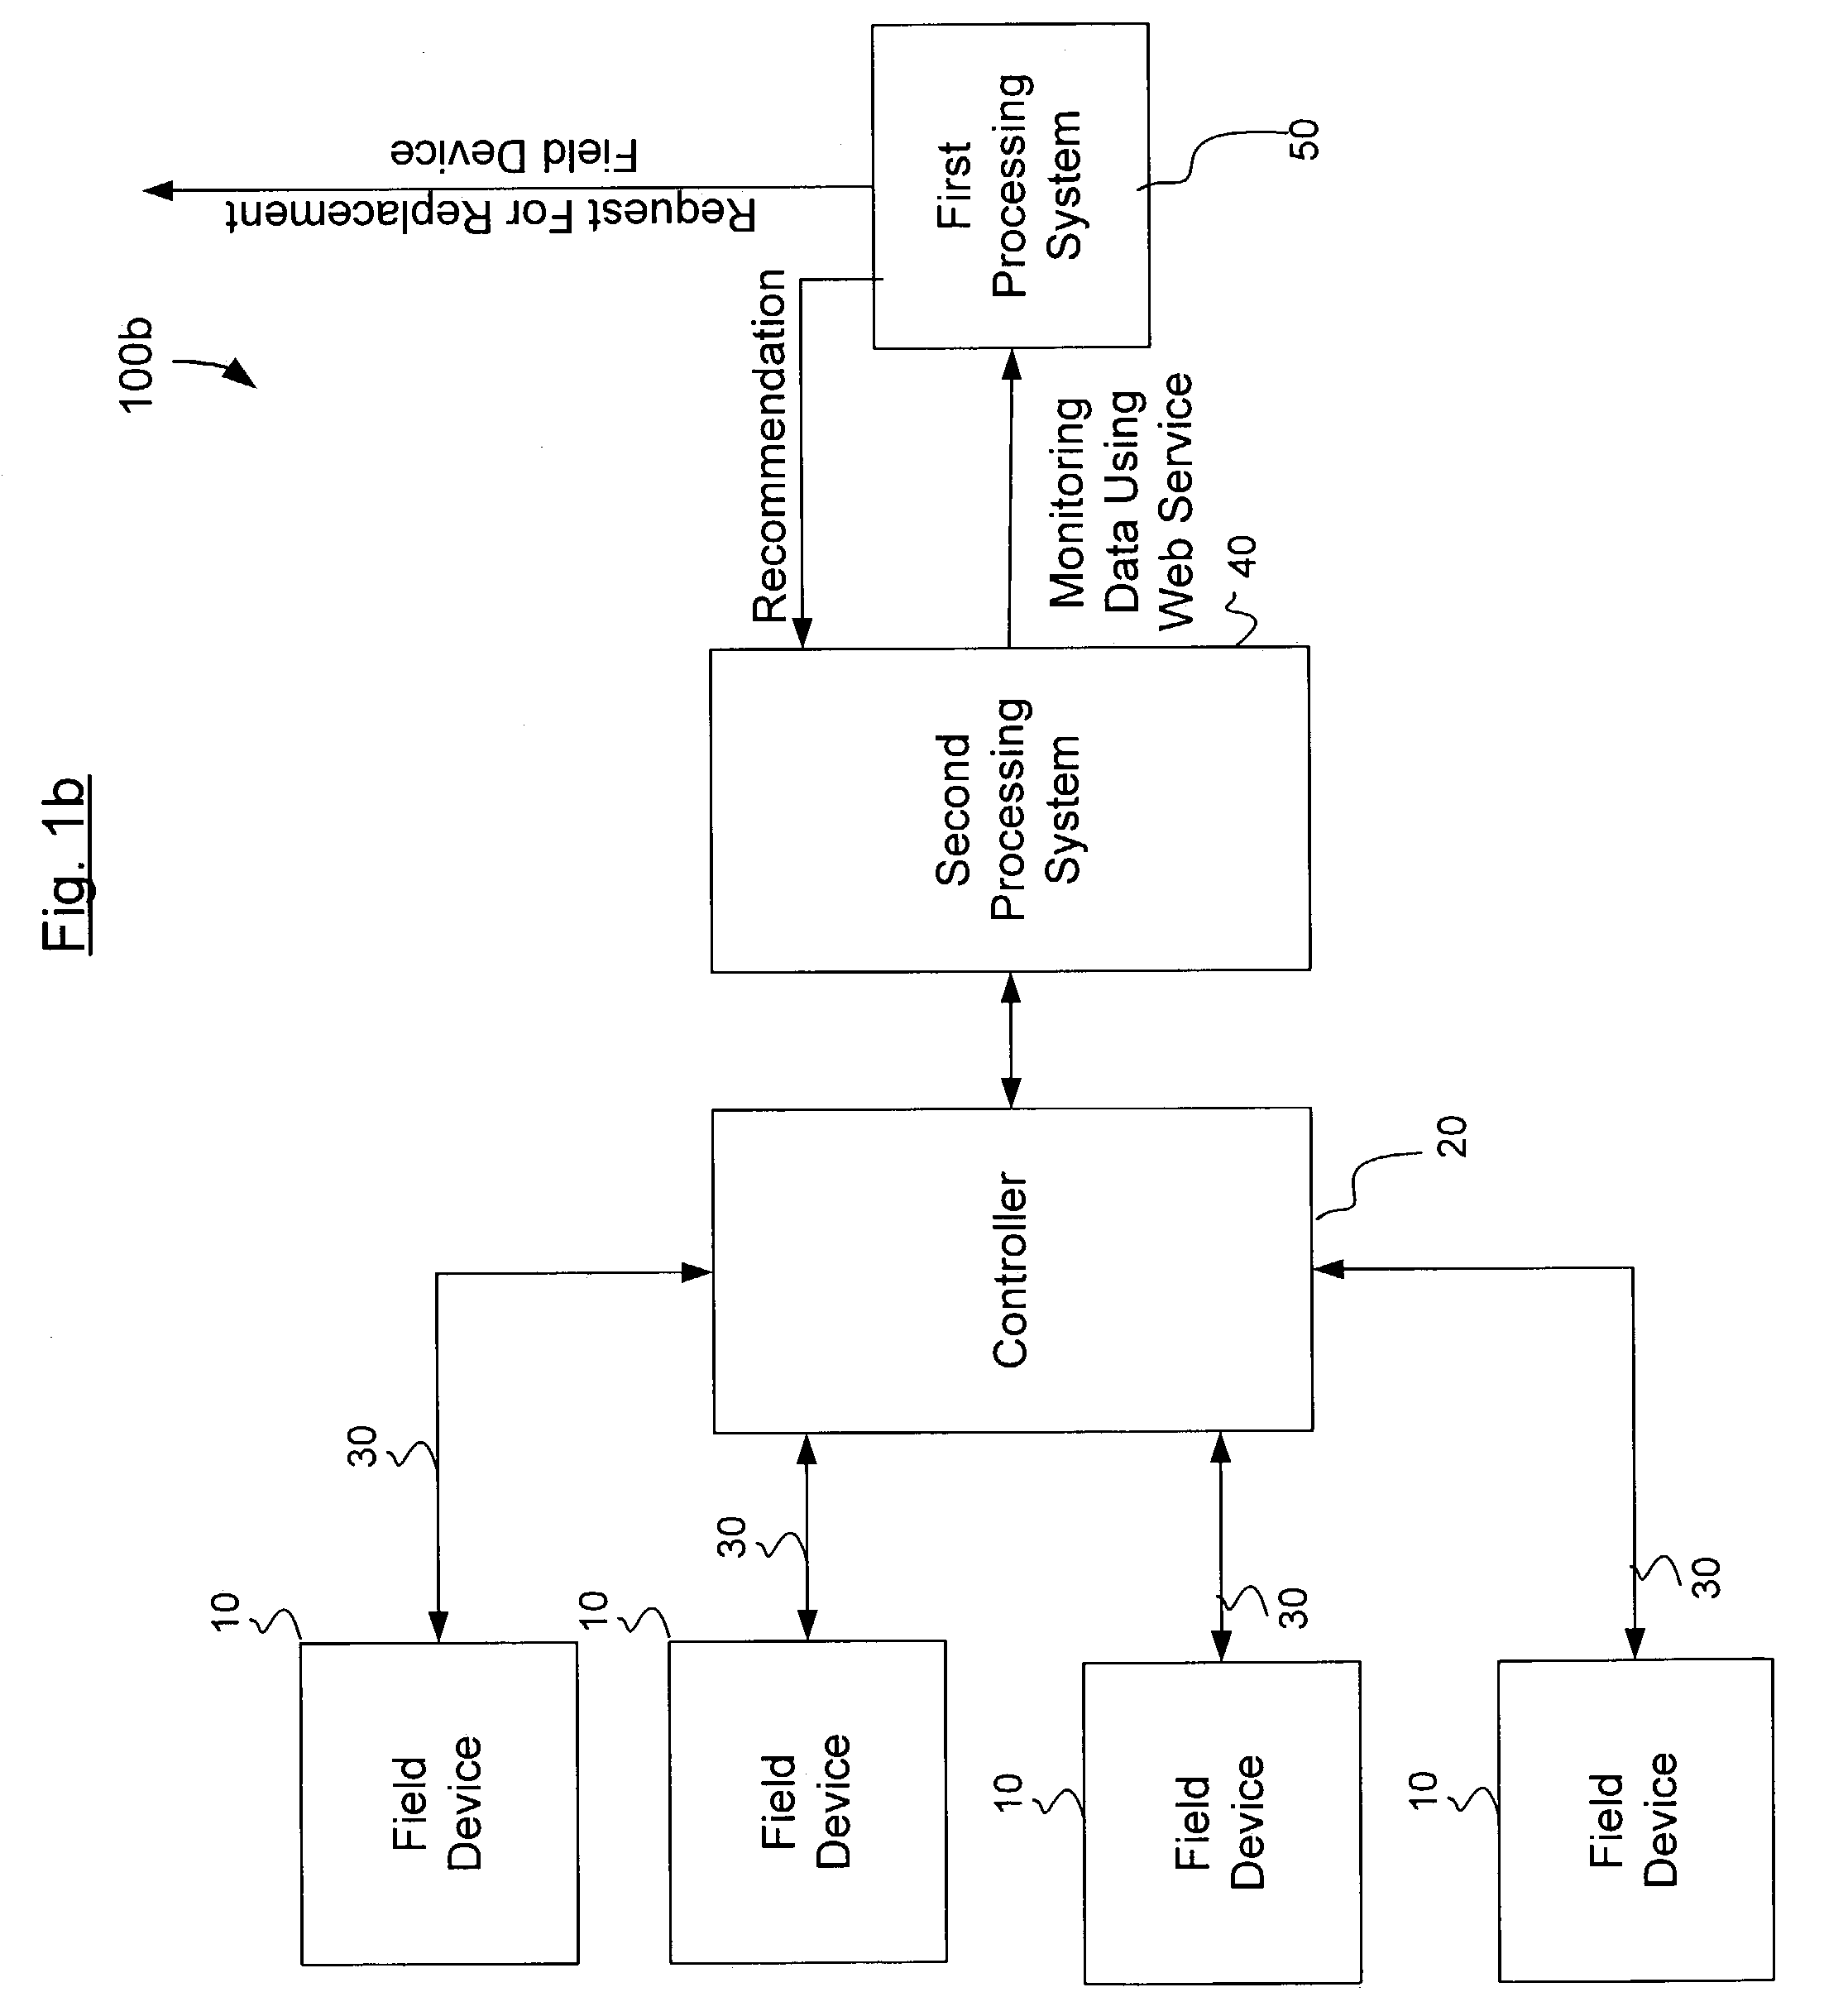 Arrangements and methods for monitoring processes and devices using a web service